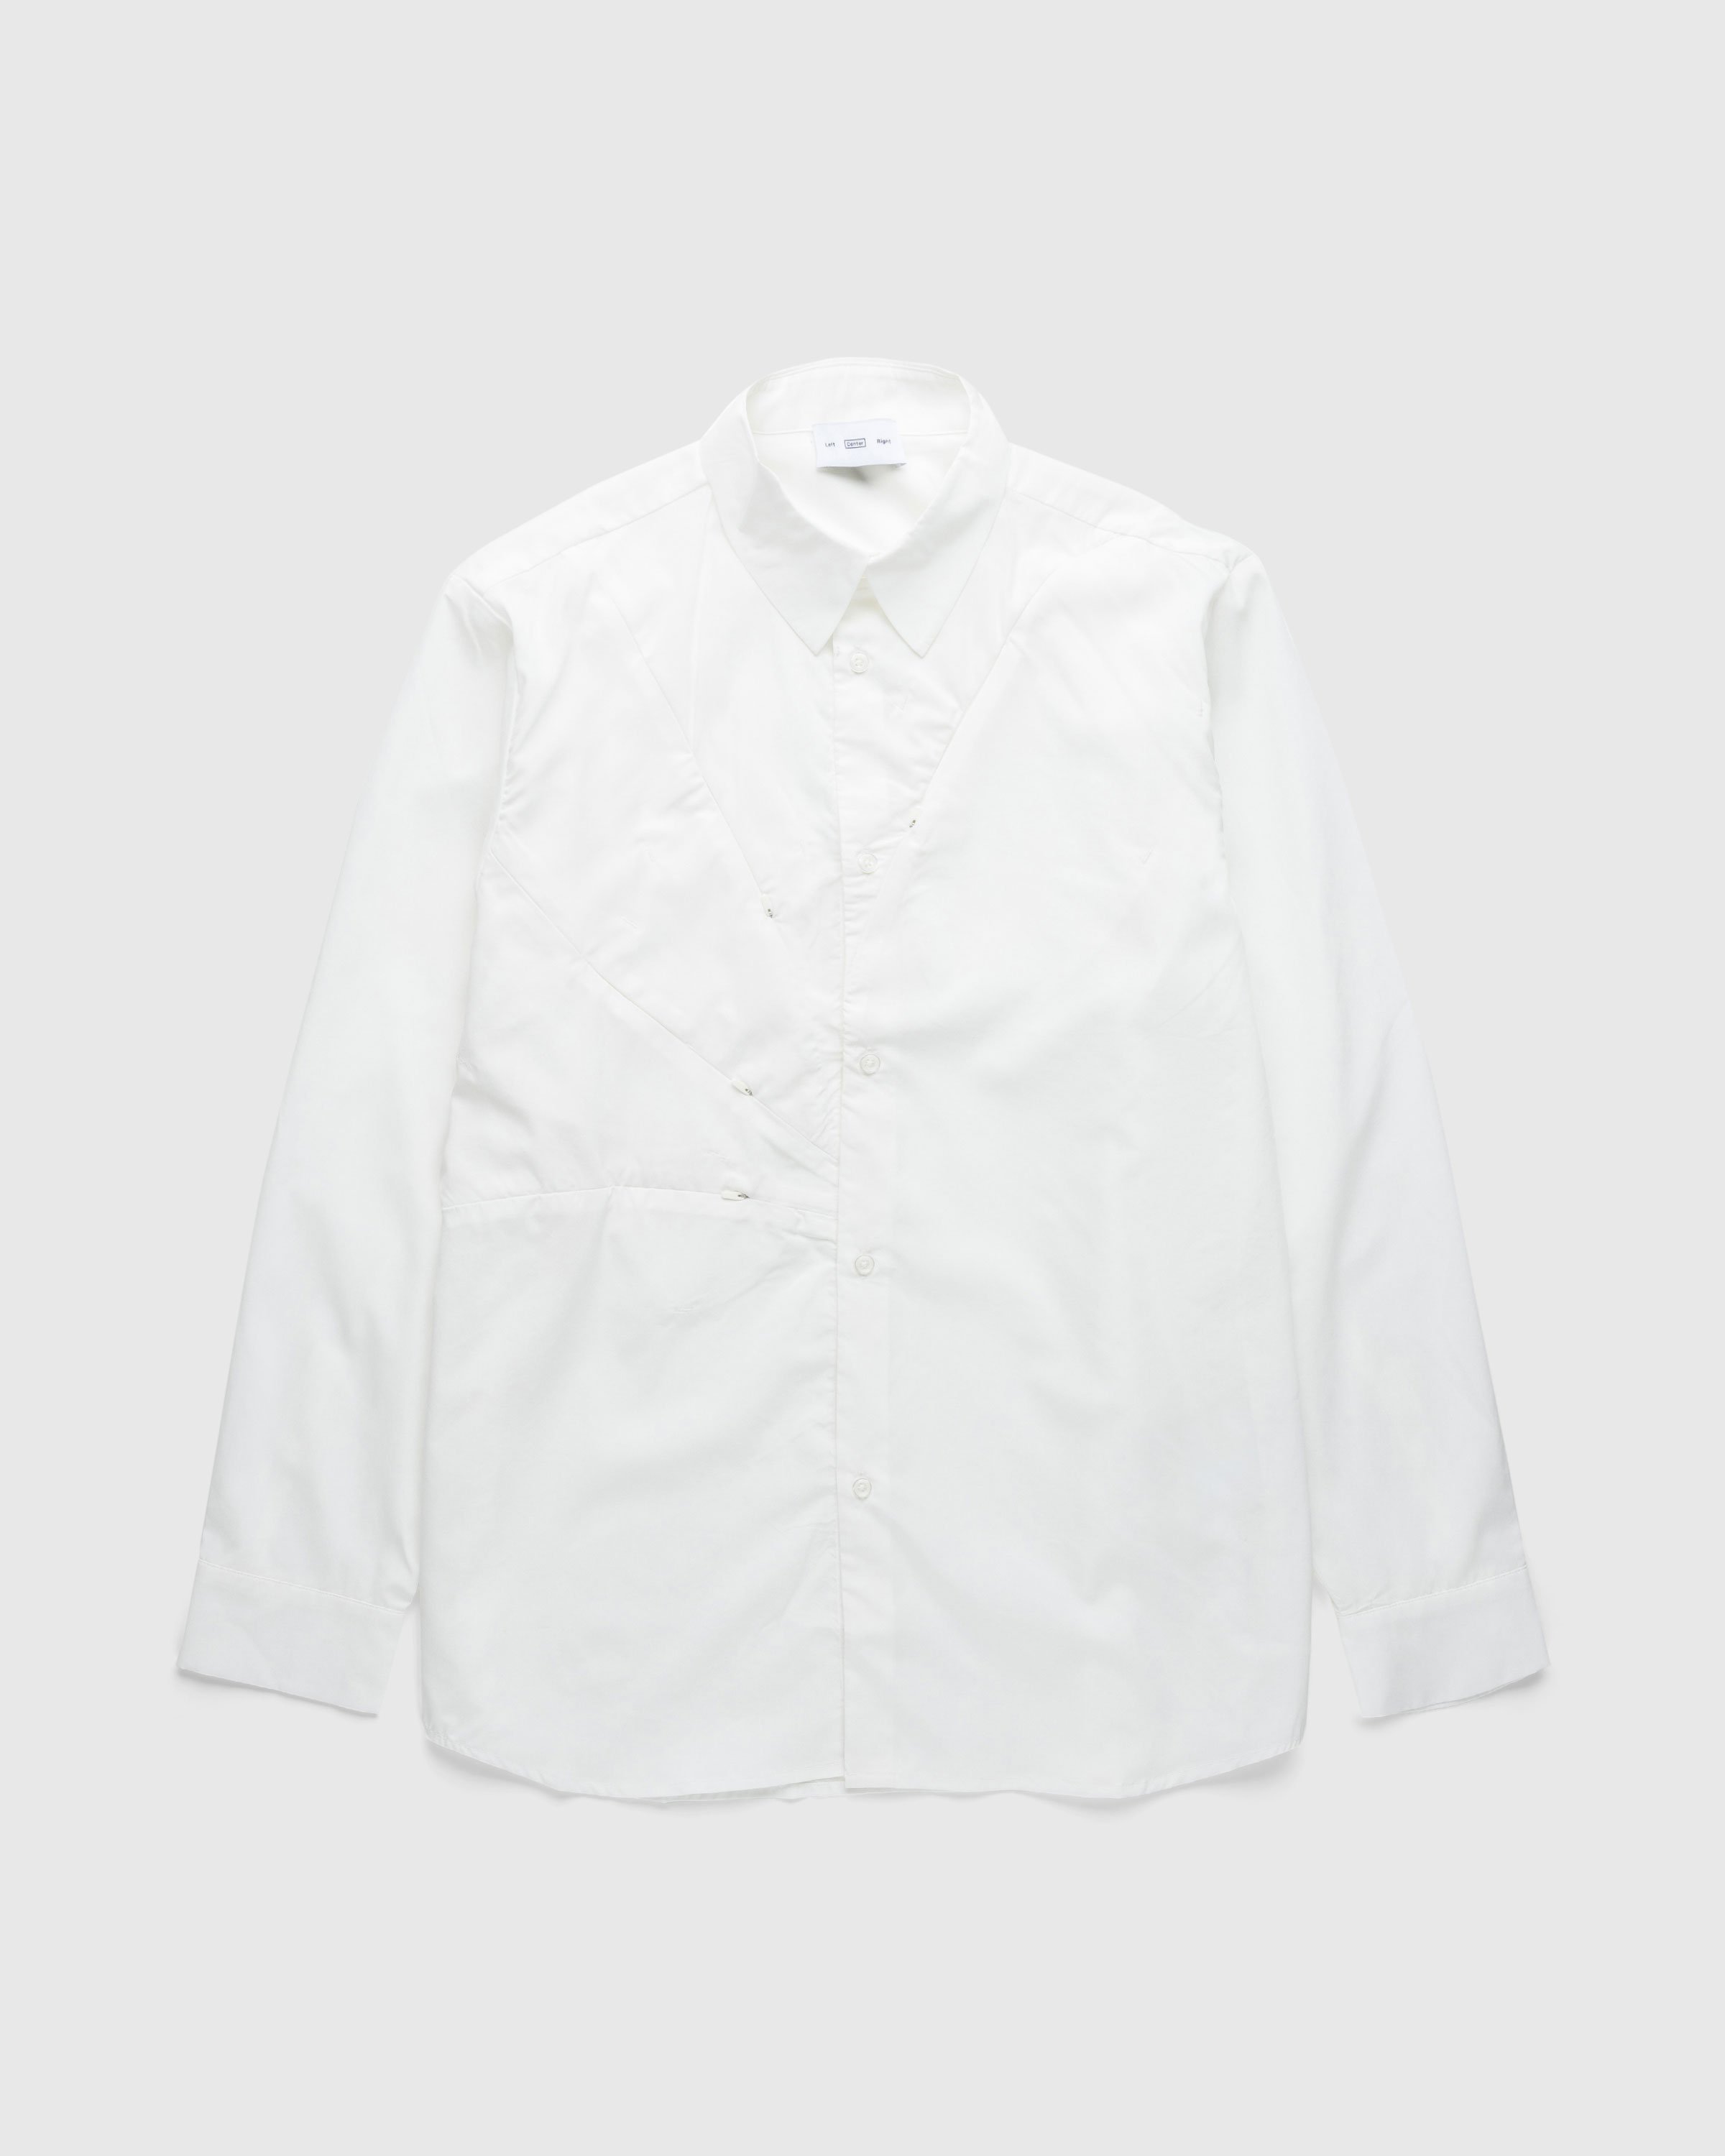 Post Archive Faction (PAF) - 5.1 SHIRT CENTER - Clothing - White - Image 1